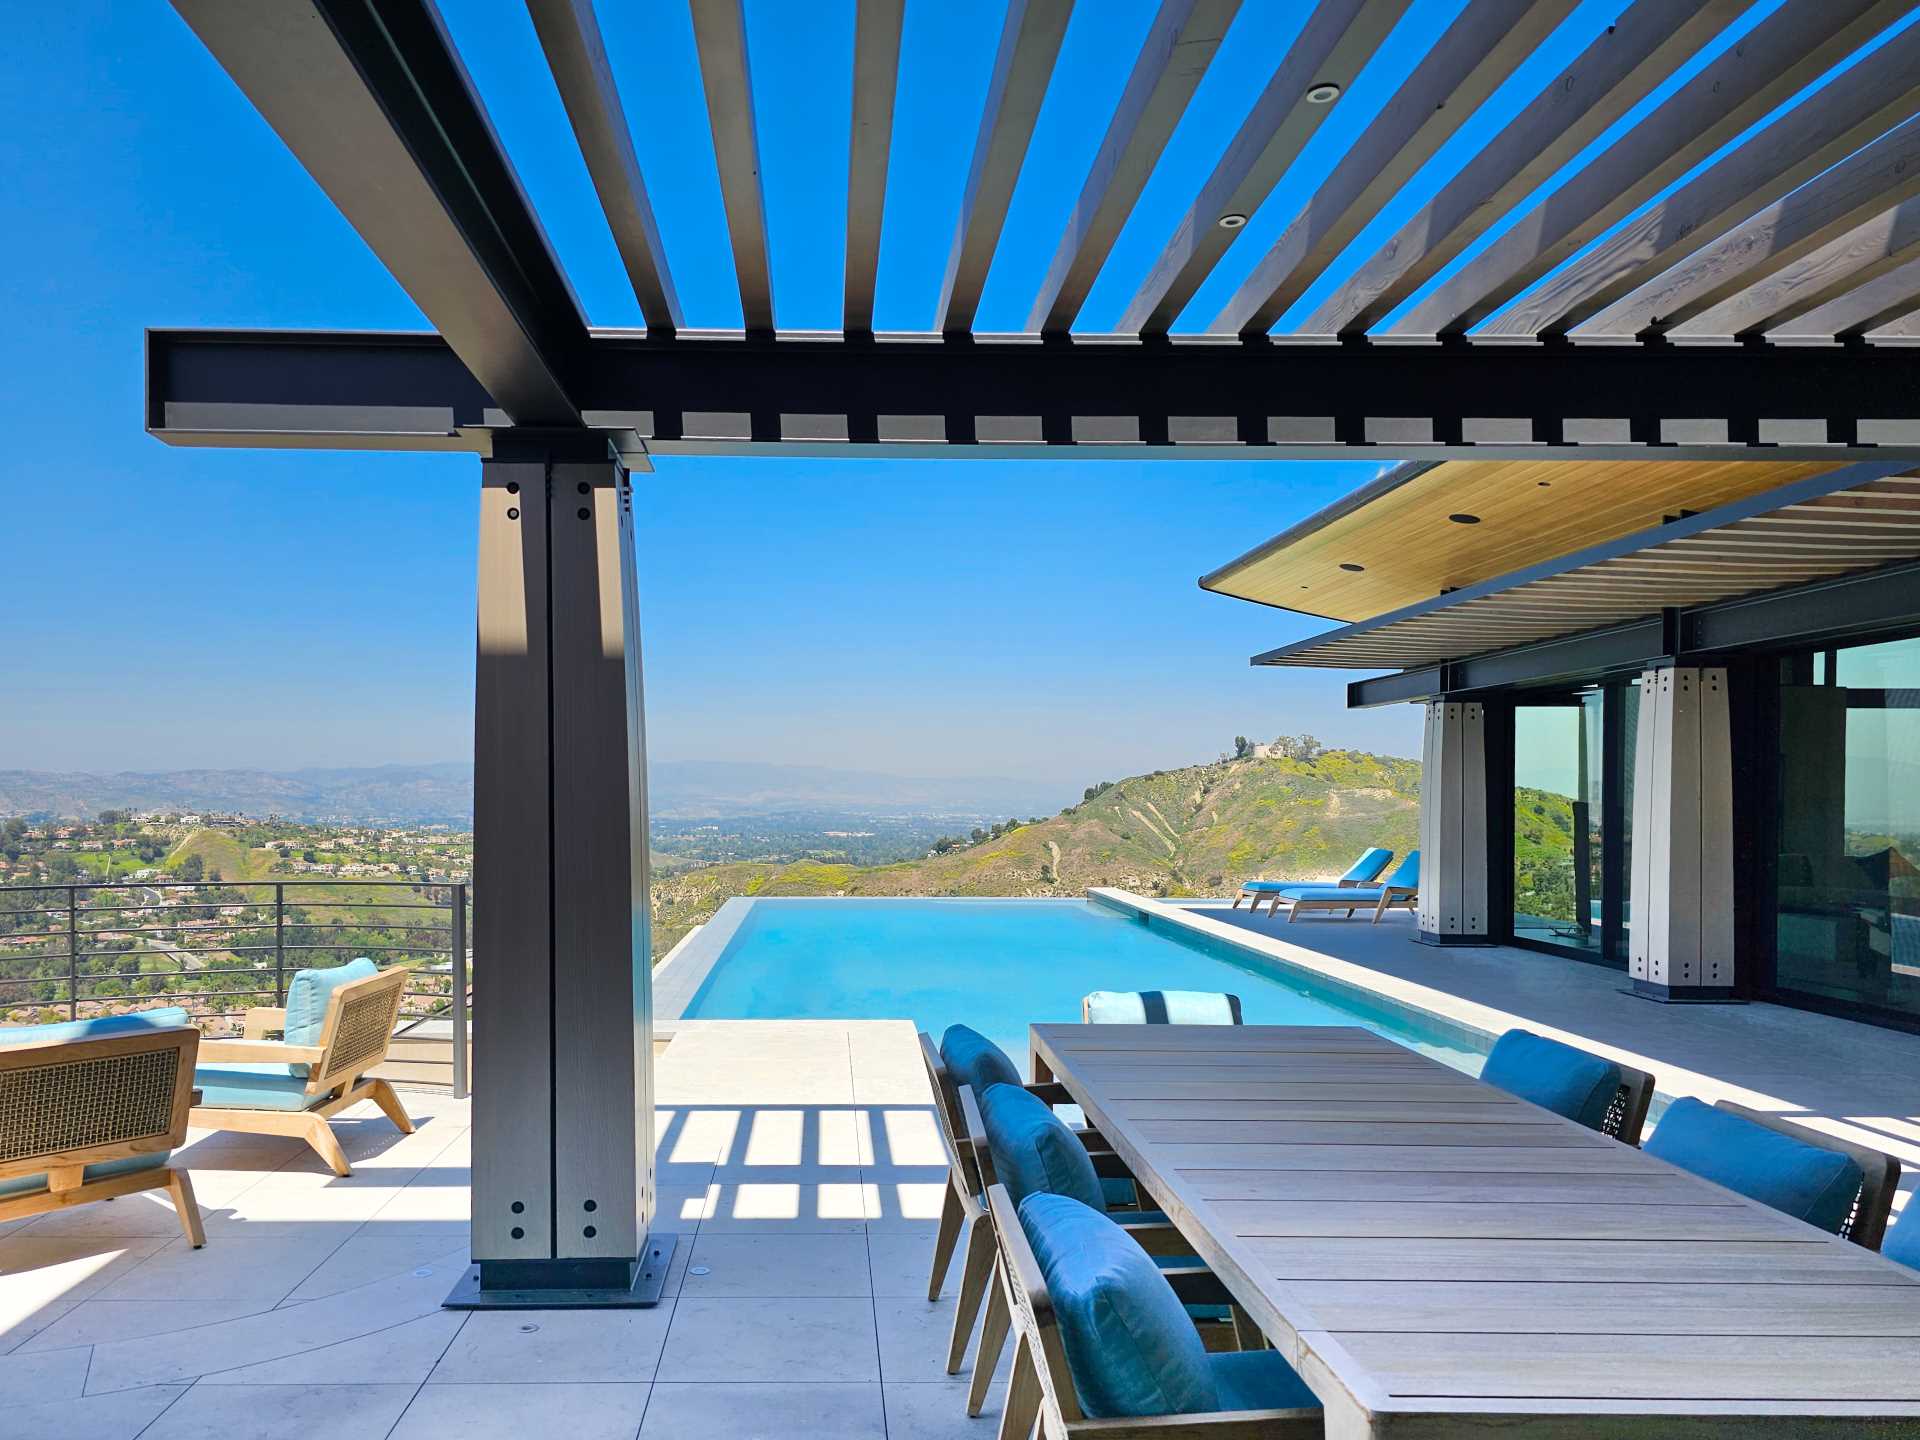 Wood and steel columns are on display by the pool of this contemporary house, while the overhanging roof provides shelter and shade, and a pergola defines an outdoor living space furnished with a couch, dining area, and bbq.